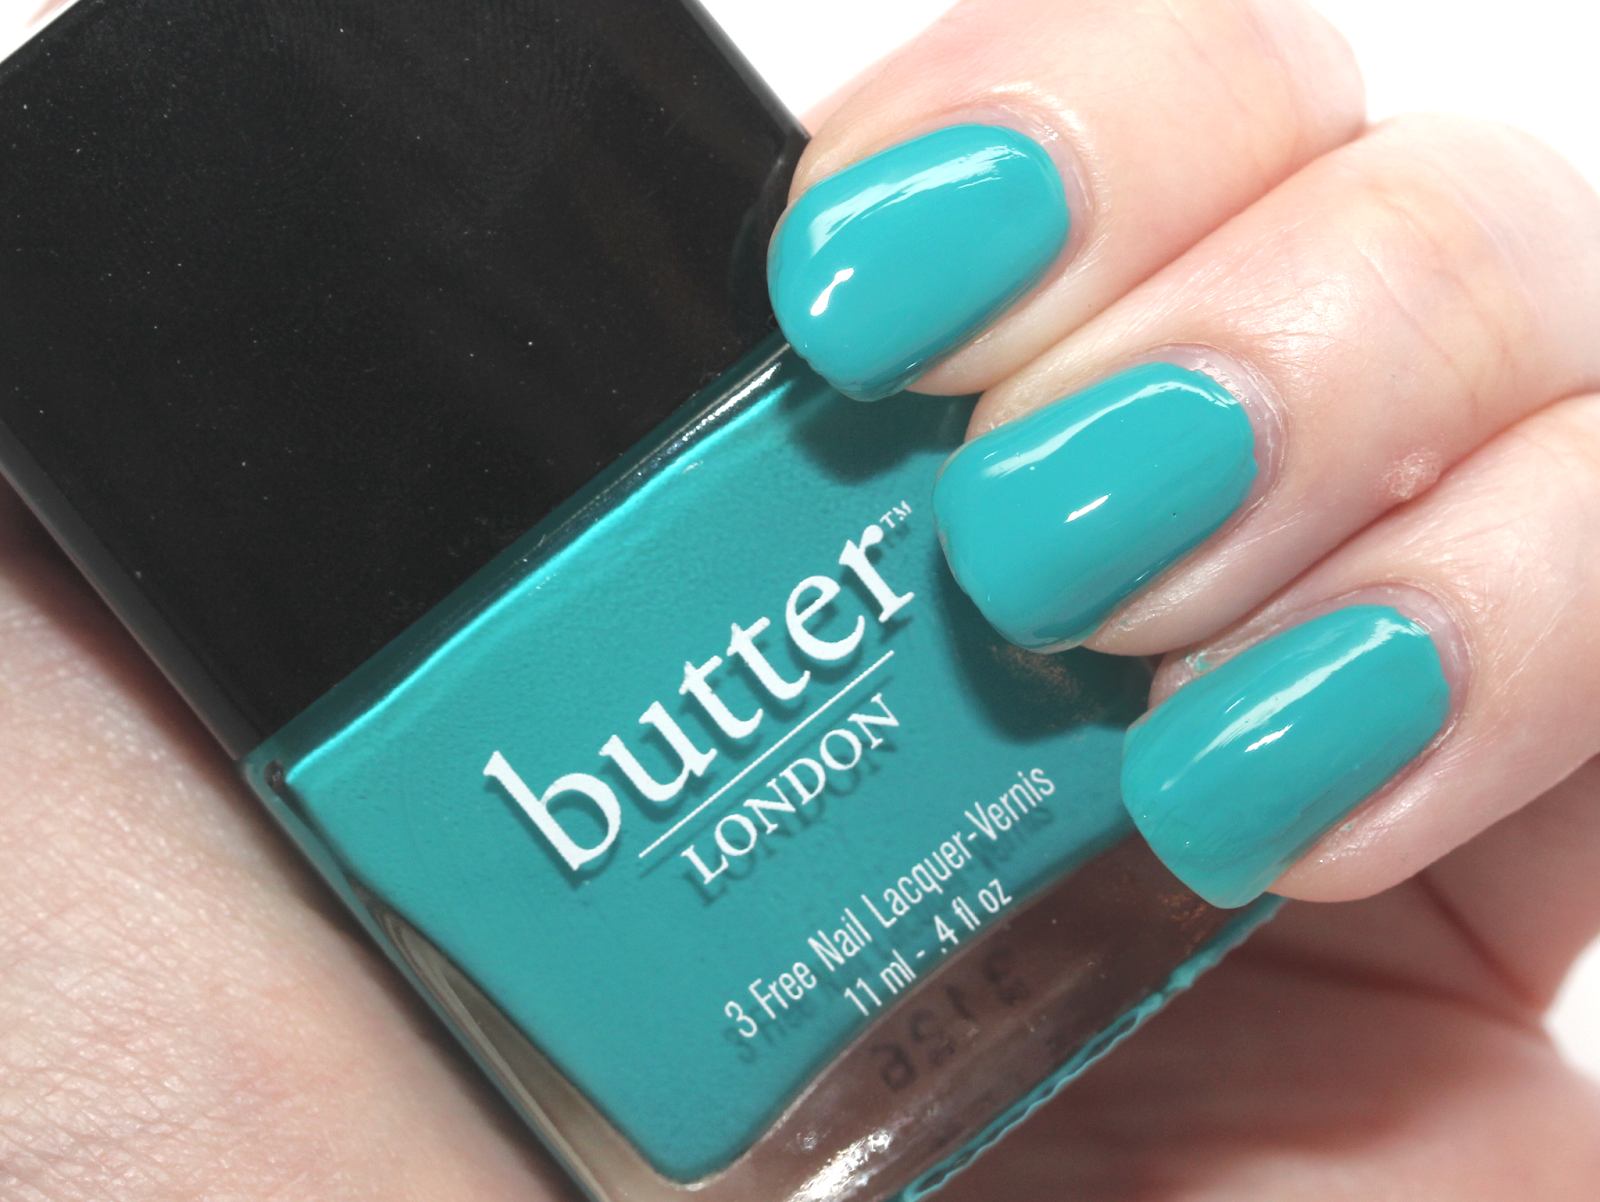 10. Butter London Nail Lacquer in "Jelly Apple" - wide 7